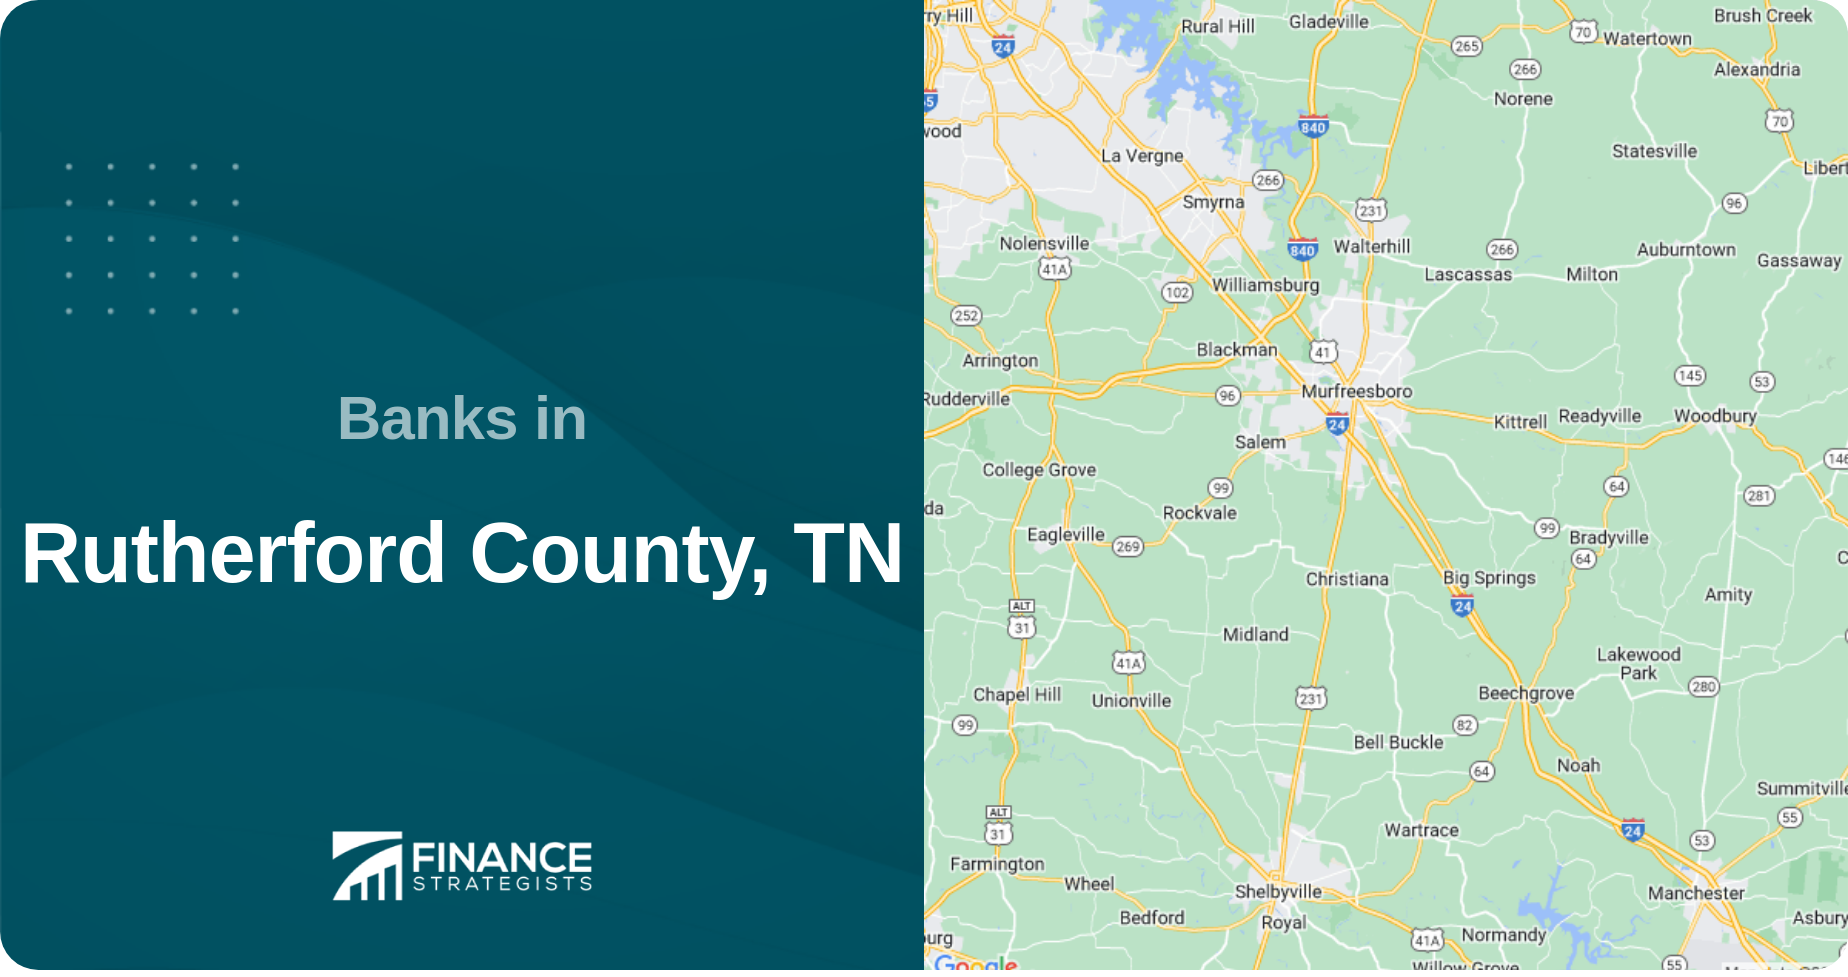 Banks in Rutherford County, TN